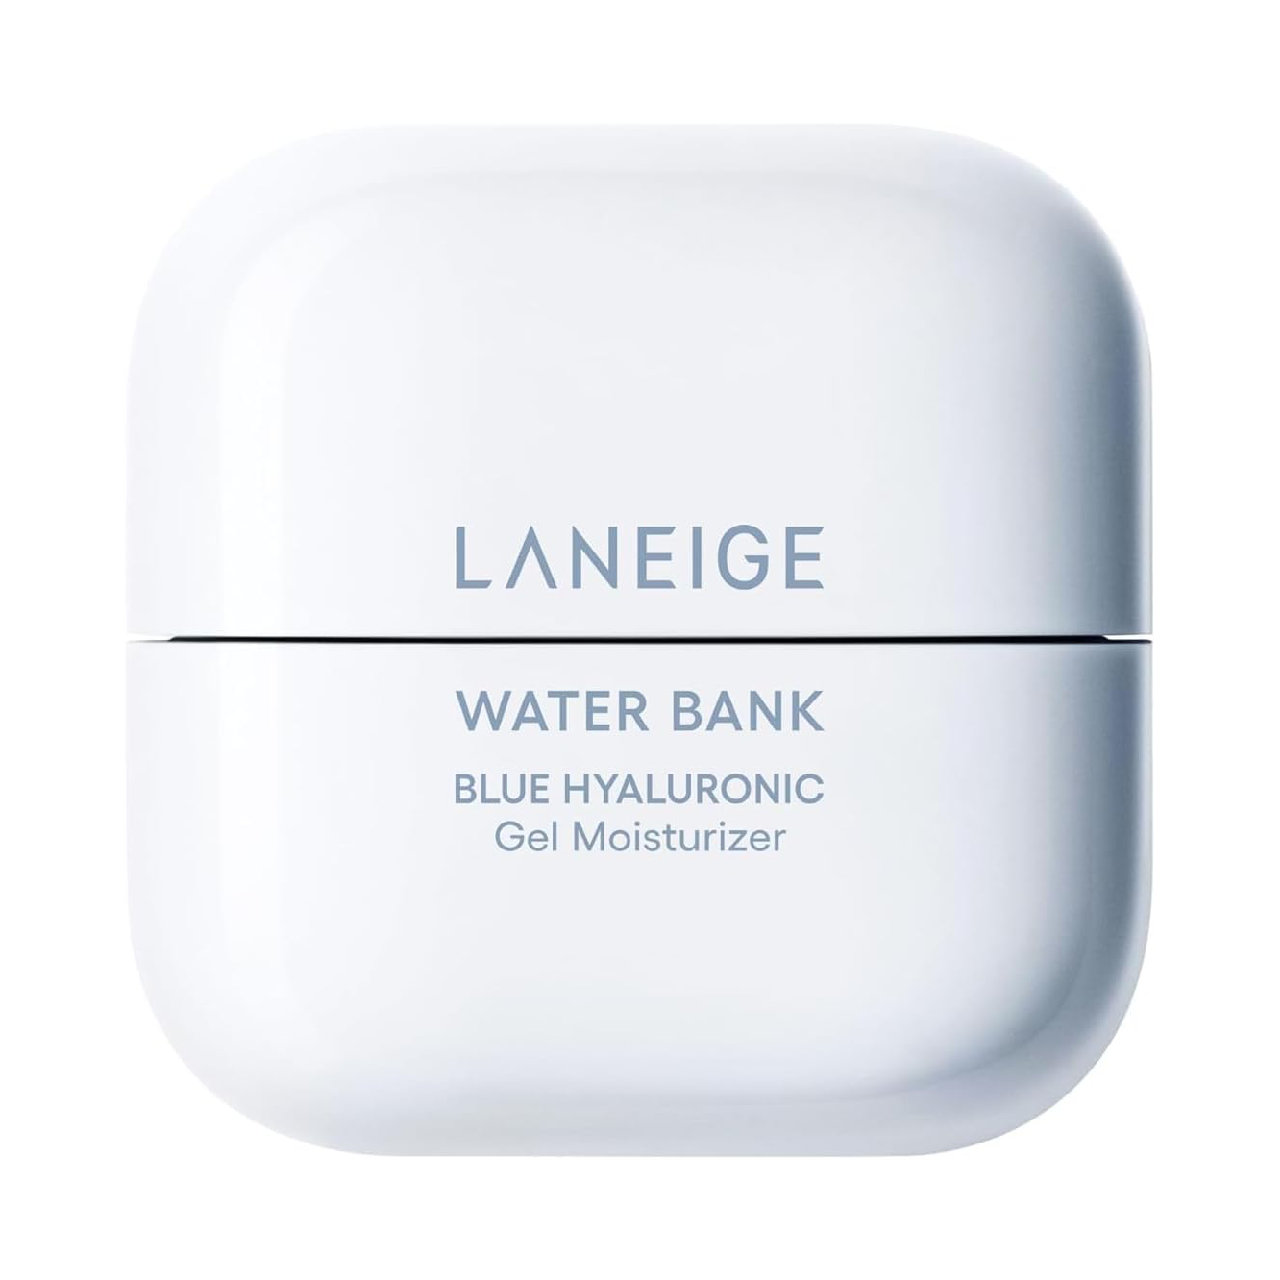 Jar of Laneige Water Bank Hydro Gel on a white background